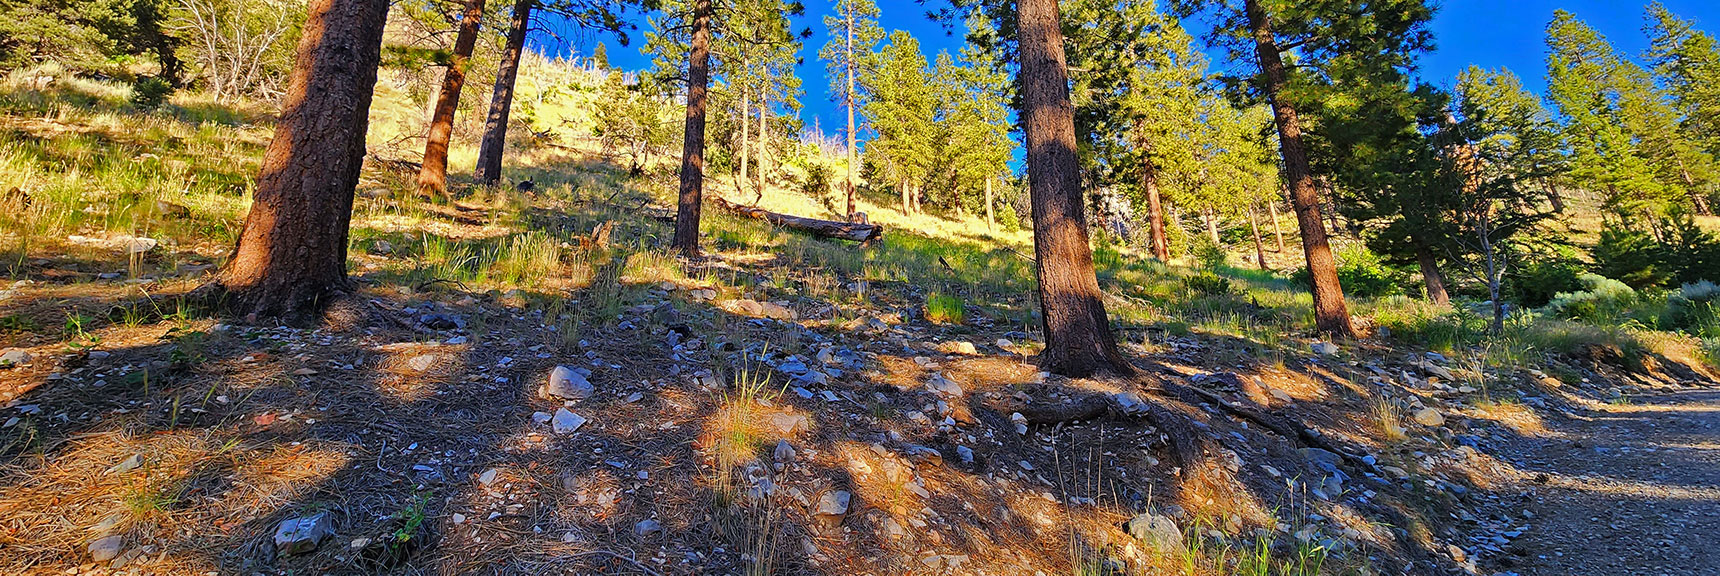 Prior Image: Arrival on Rainbow Ridge Rd. View Back Up Final Descent. | Harris Mountain Triangle | Mt Charleston Wilderness, Nevada